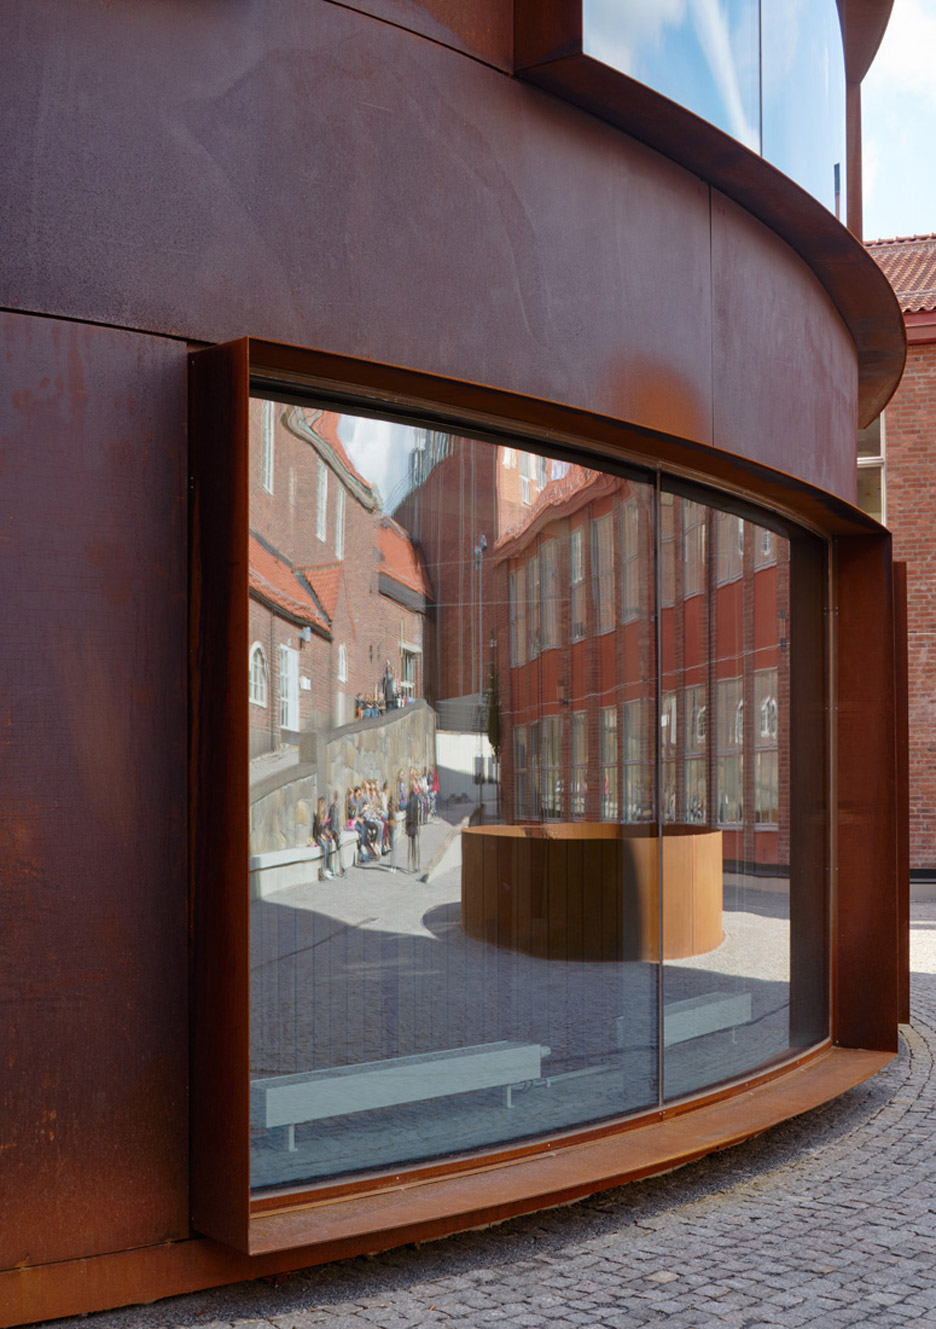 KTH School of Architecture by Tham and Videgard